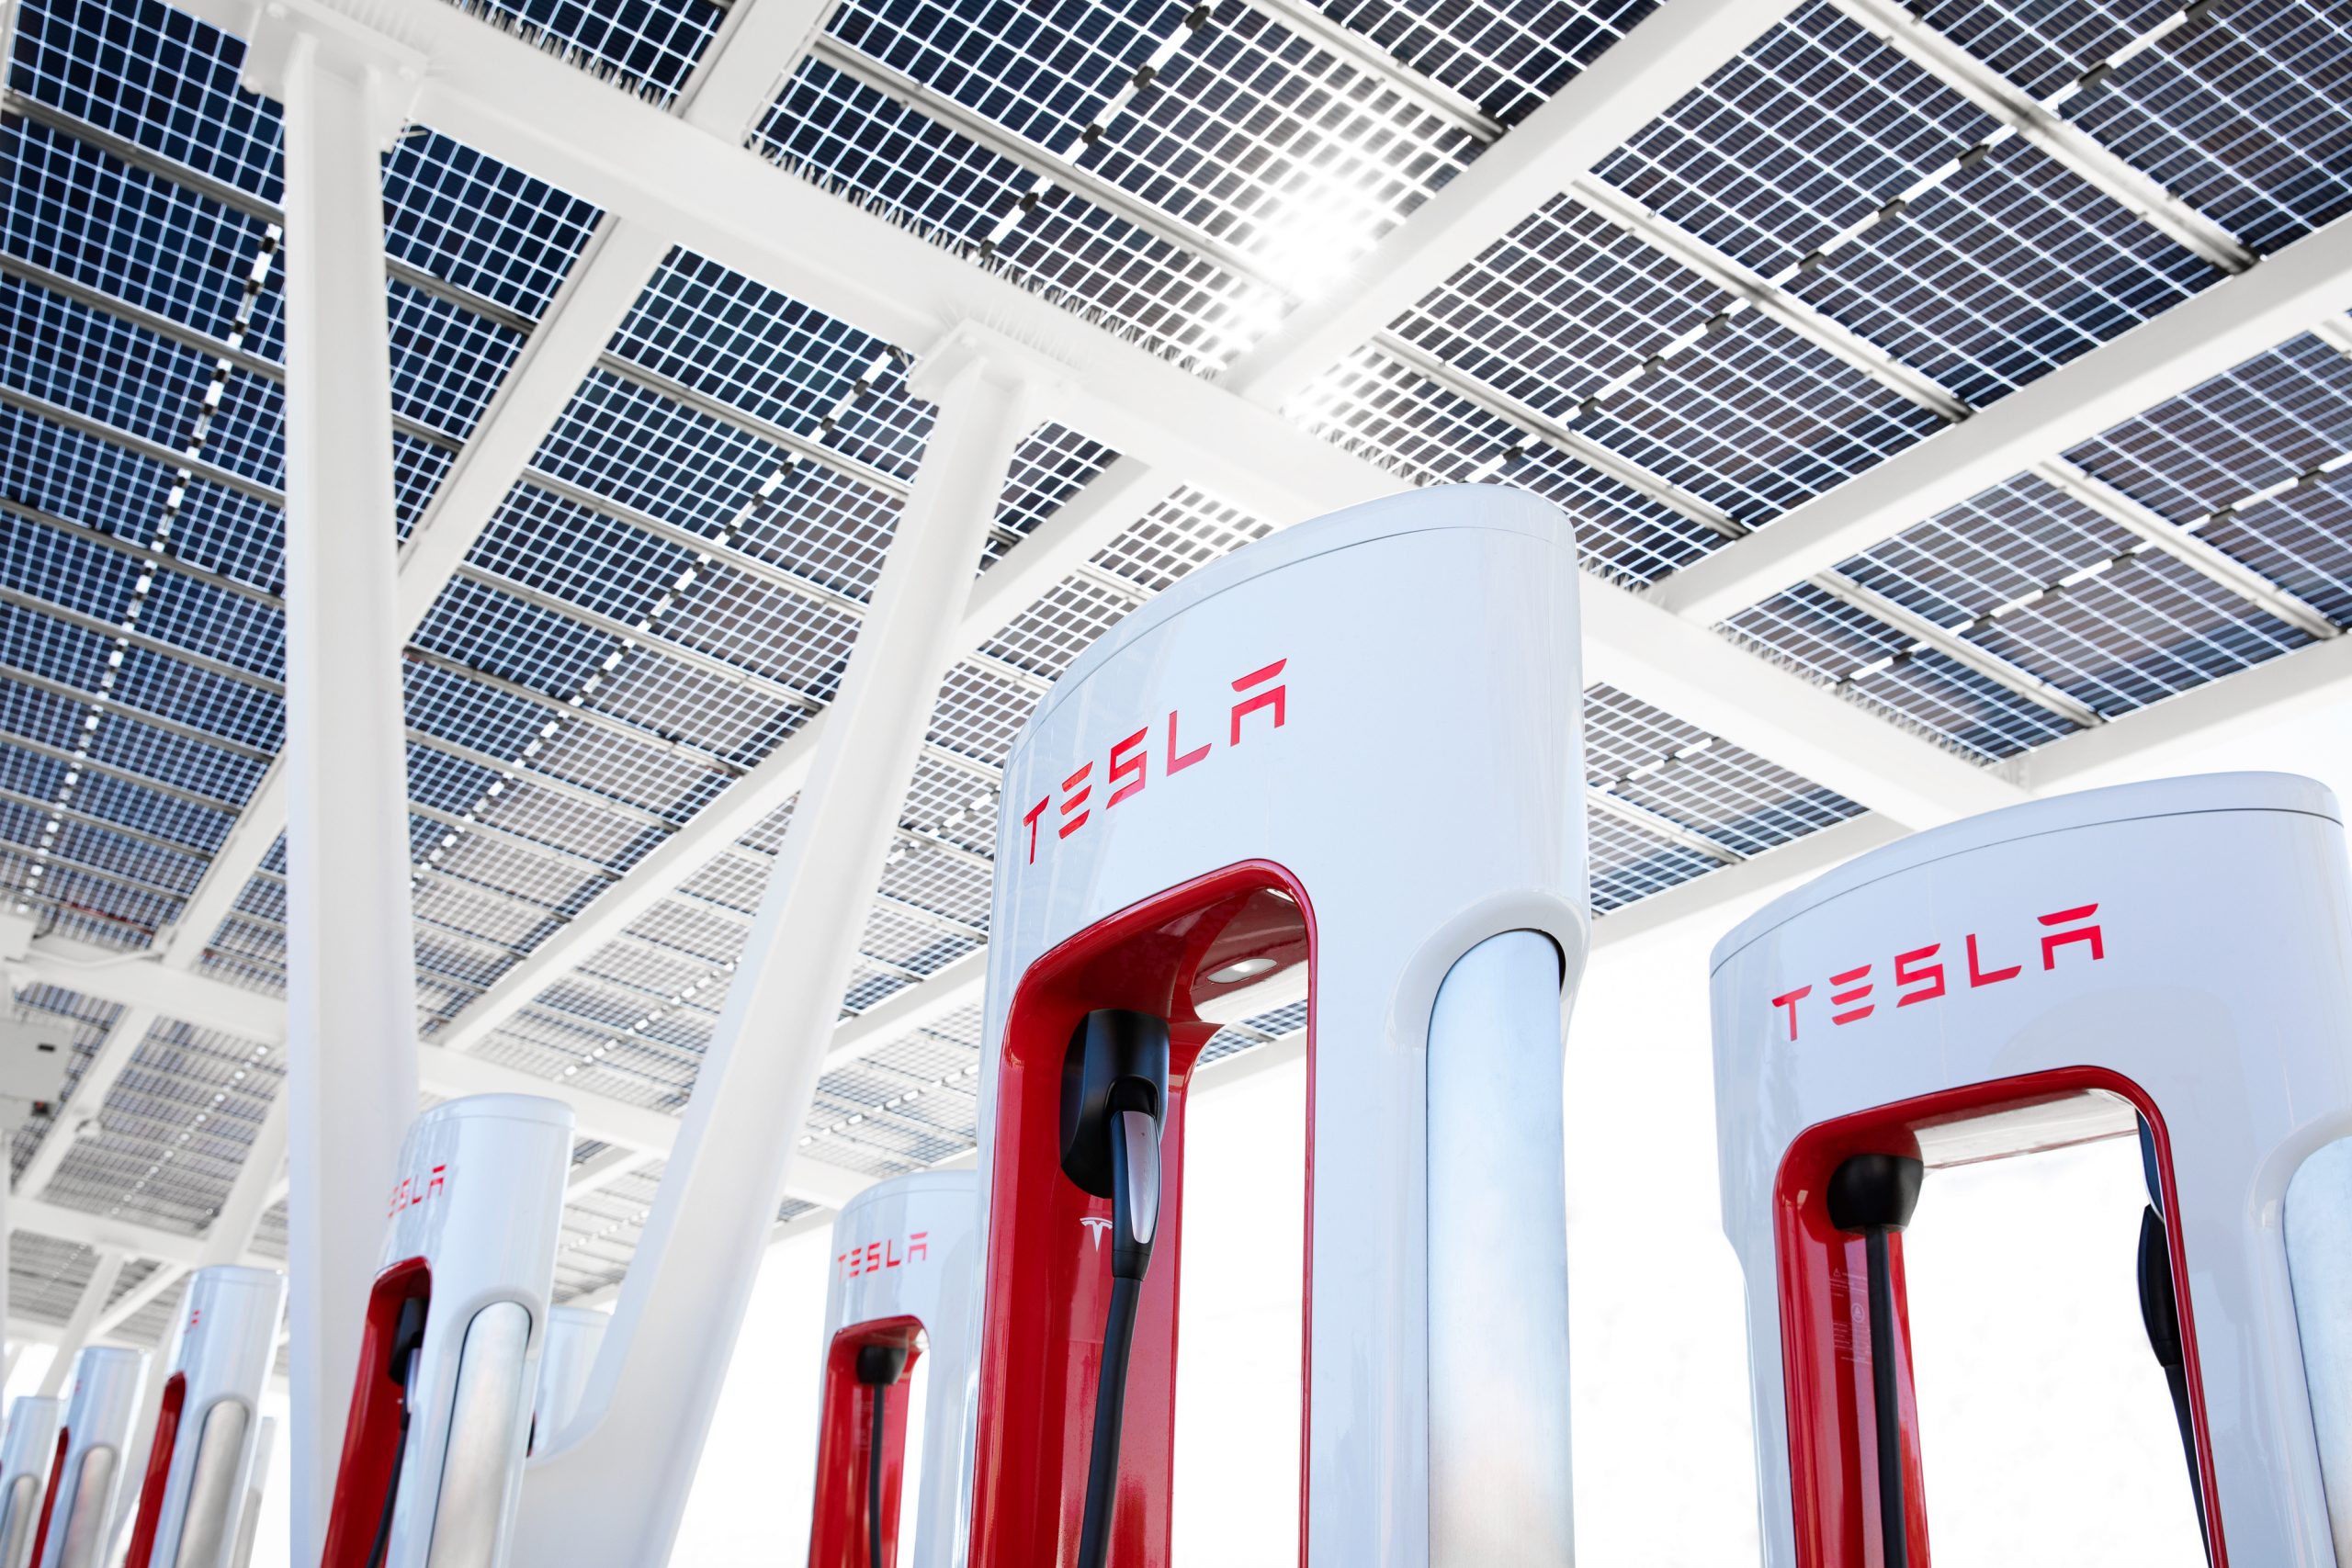 Tesla's Big Turnaround: How Elon Musk's Bold Moves Are Shaping the Future of Electric Cars